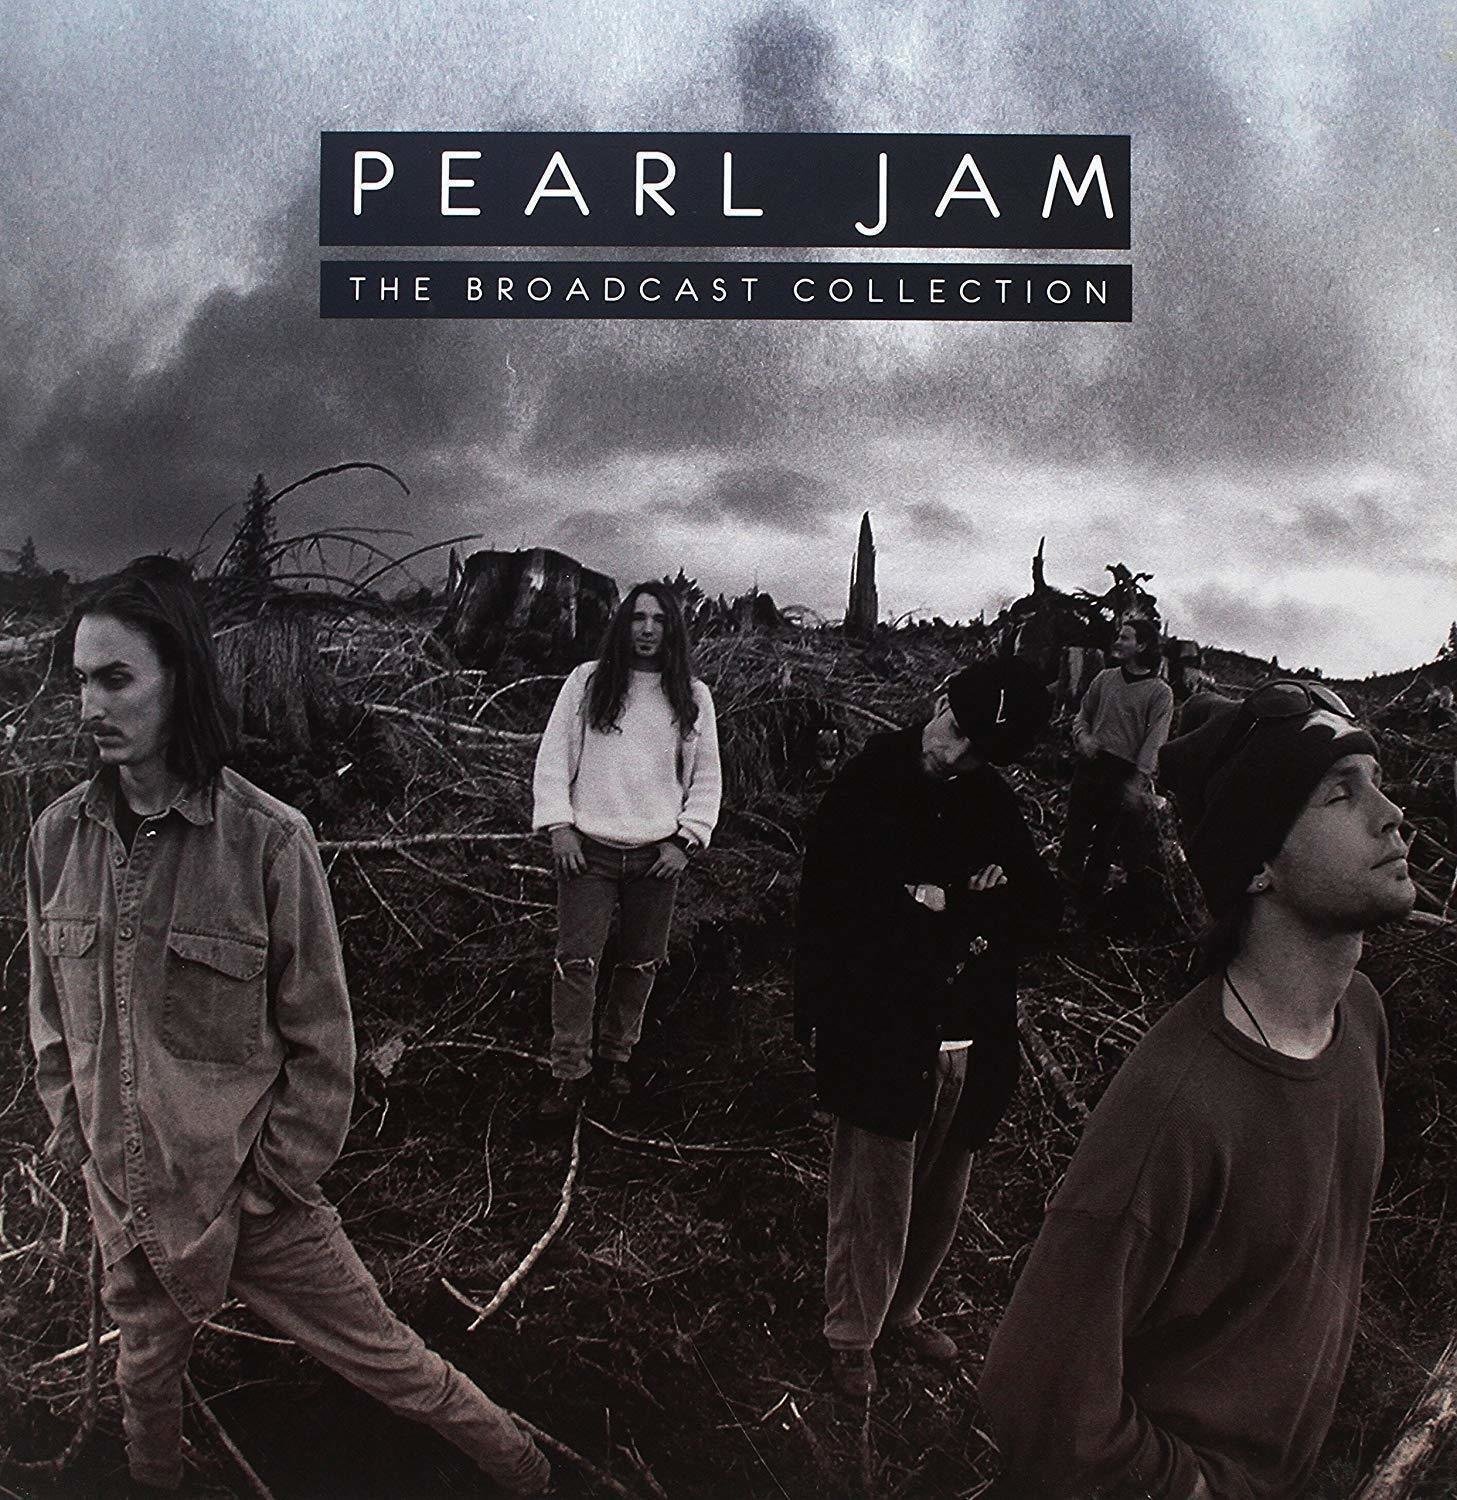 LP Pearl Jam - The Broadcast Collection (3 LP)